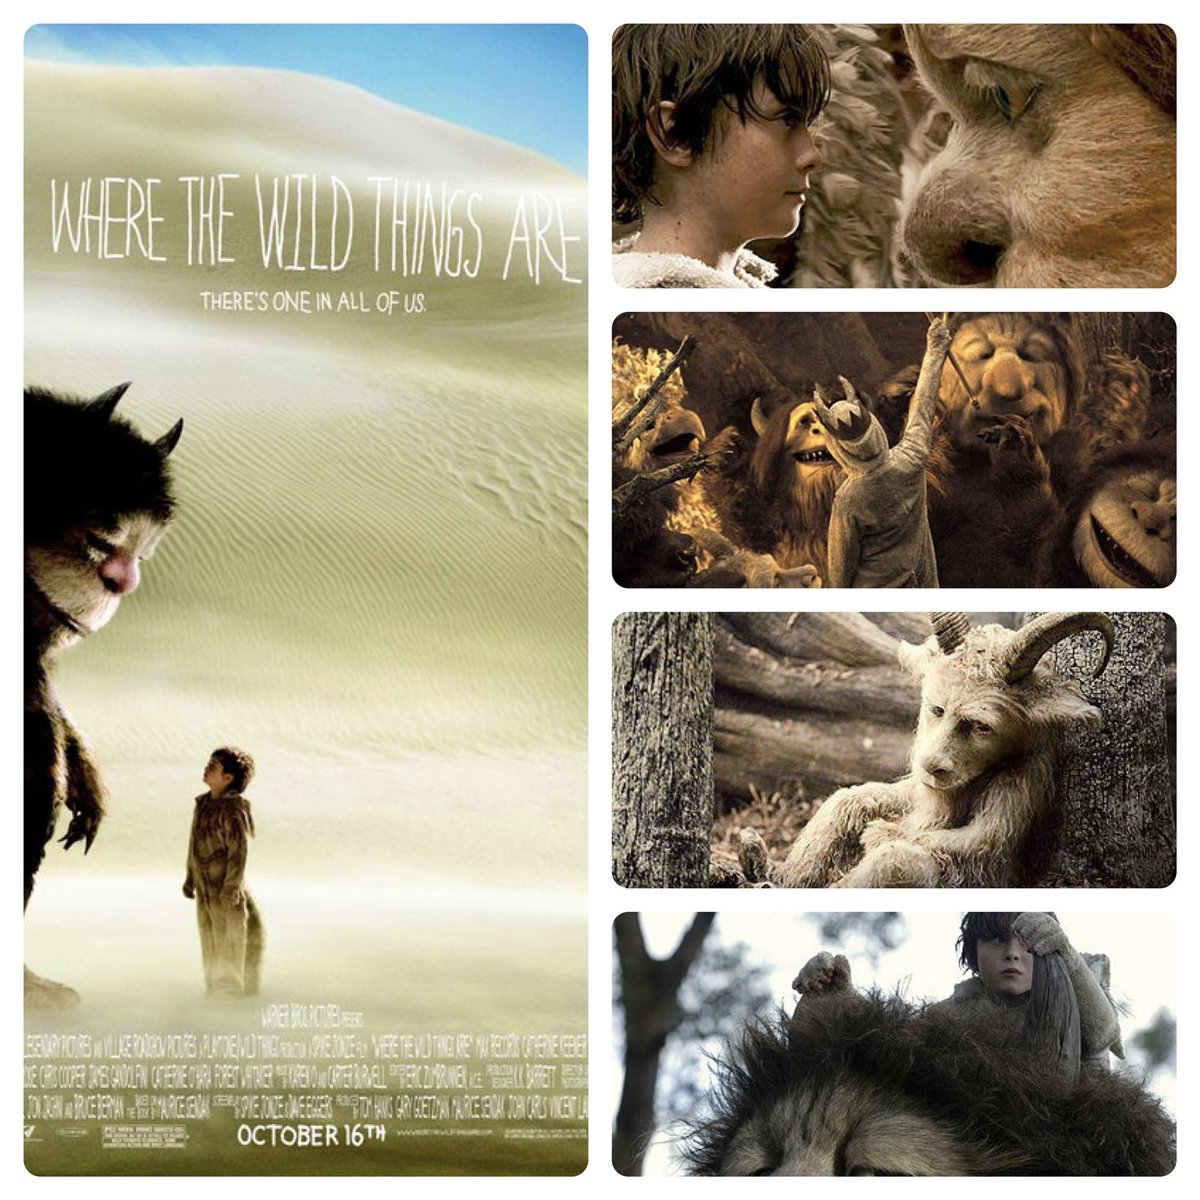 Where the Wild Things Are celebrates 14th anniversary today.
#wherethewildthingsare #spikejonze #maxrecords #classicmovie #classicfilms #mauricesendak #warnerbros #warnerbrosstudios #warnerbrospictures #roadshowfilms #legendarypictures #villageroadshowpictures #playtone